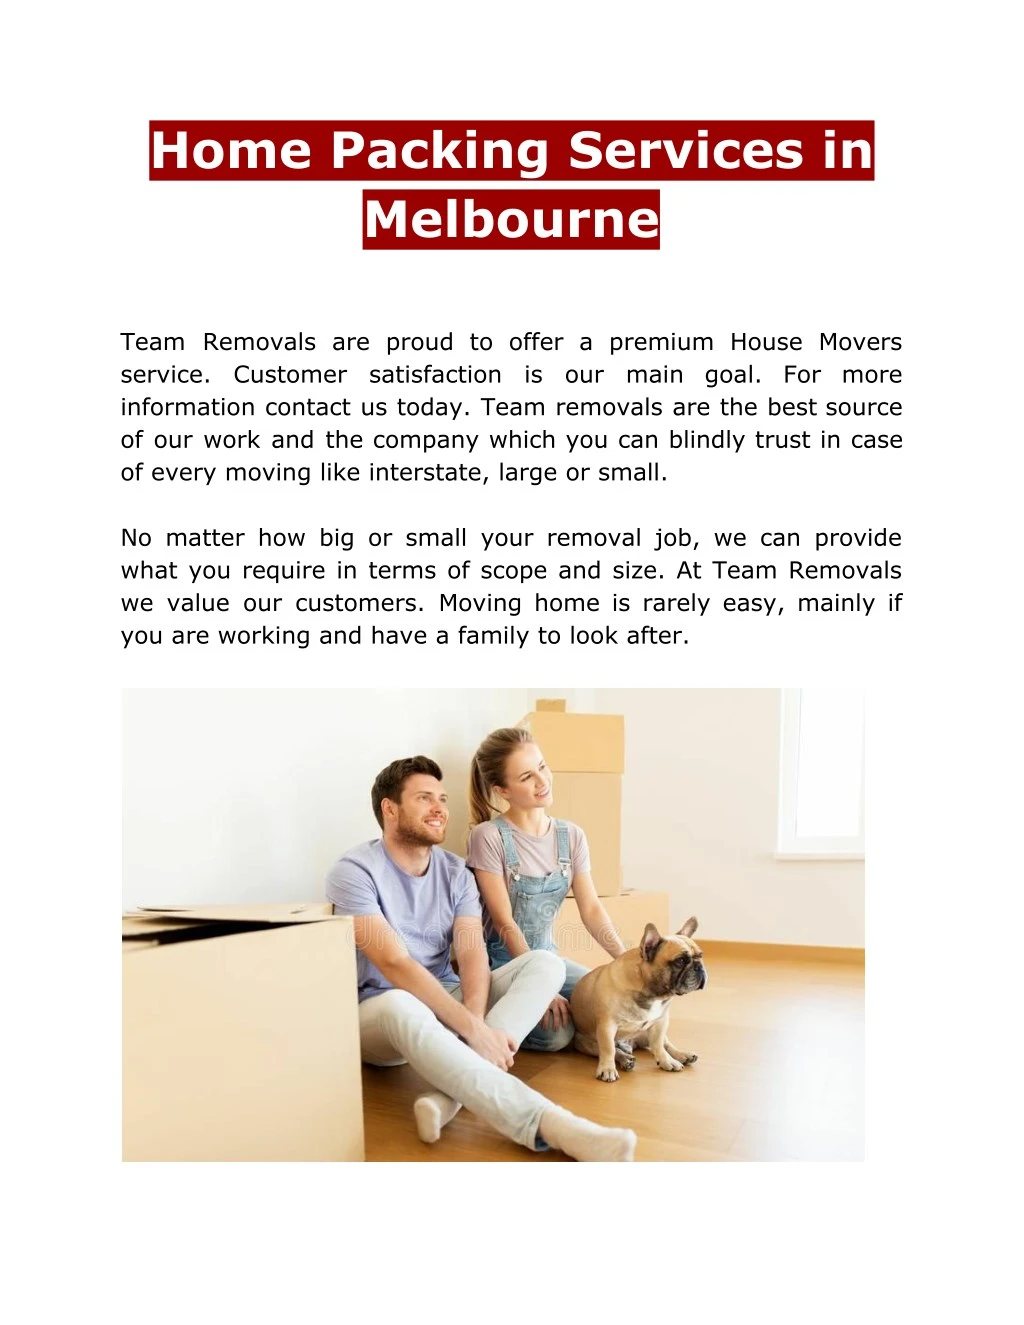 home packing services in melbourne team removals